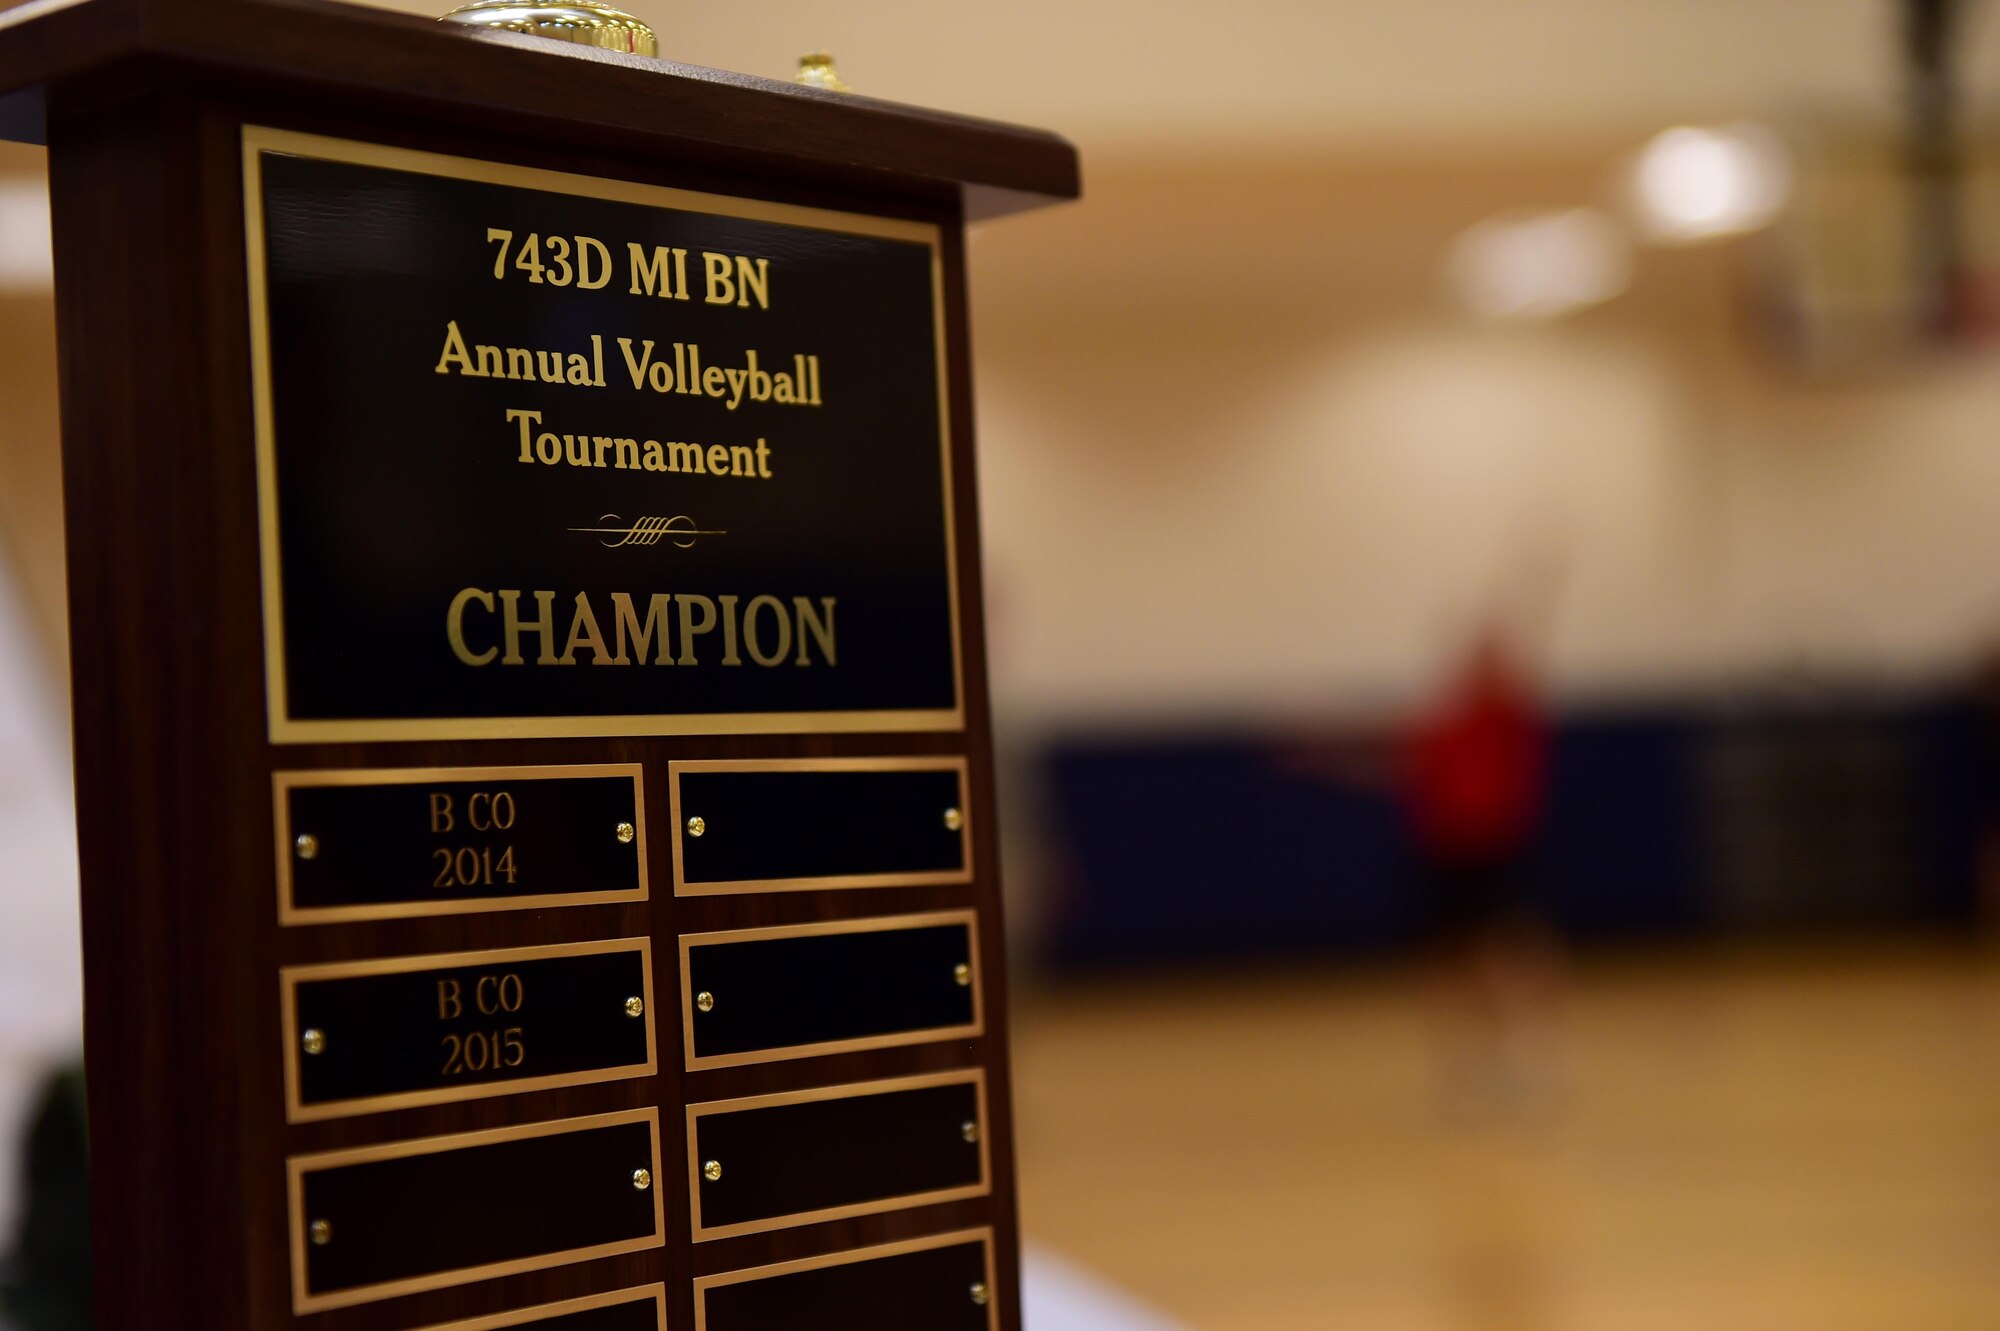 The 743d Military Intelligence Battalion annual volleyball tournament trophy is displayed April 28, 2016, at the Buckley Fitness Center on Buckley Air Force Base, Colo. The tournament was an event for the Commander’s Cup, an inter-battalion competition consisting of approximately eight events. (U.S. Air Force photo by Airman 1st Class Gabrielle Spradling/Released)